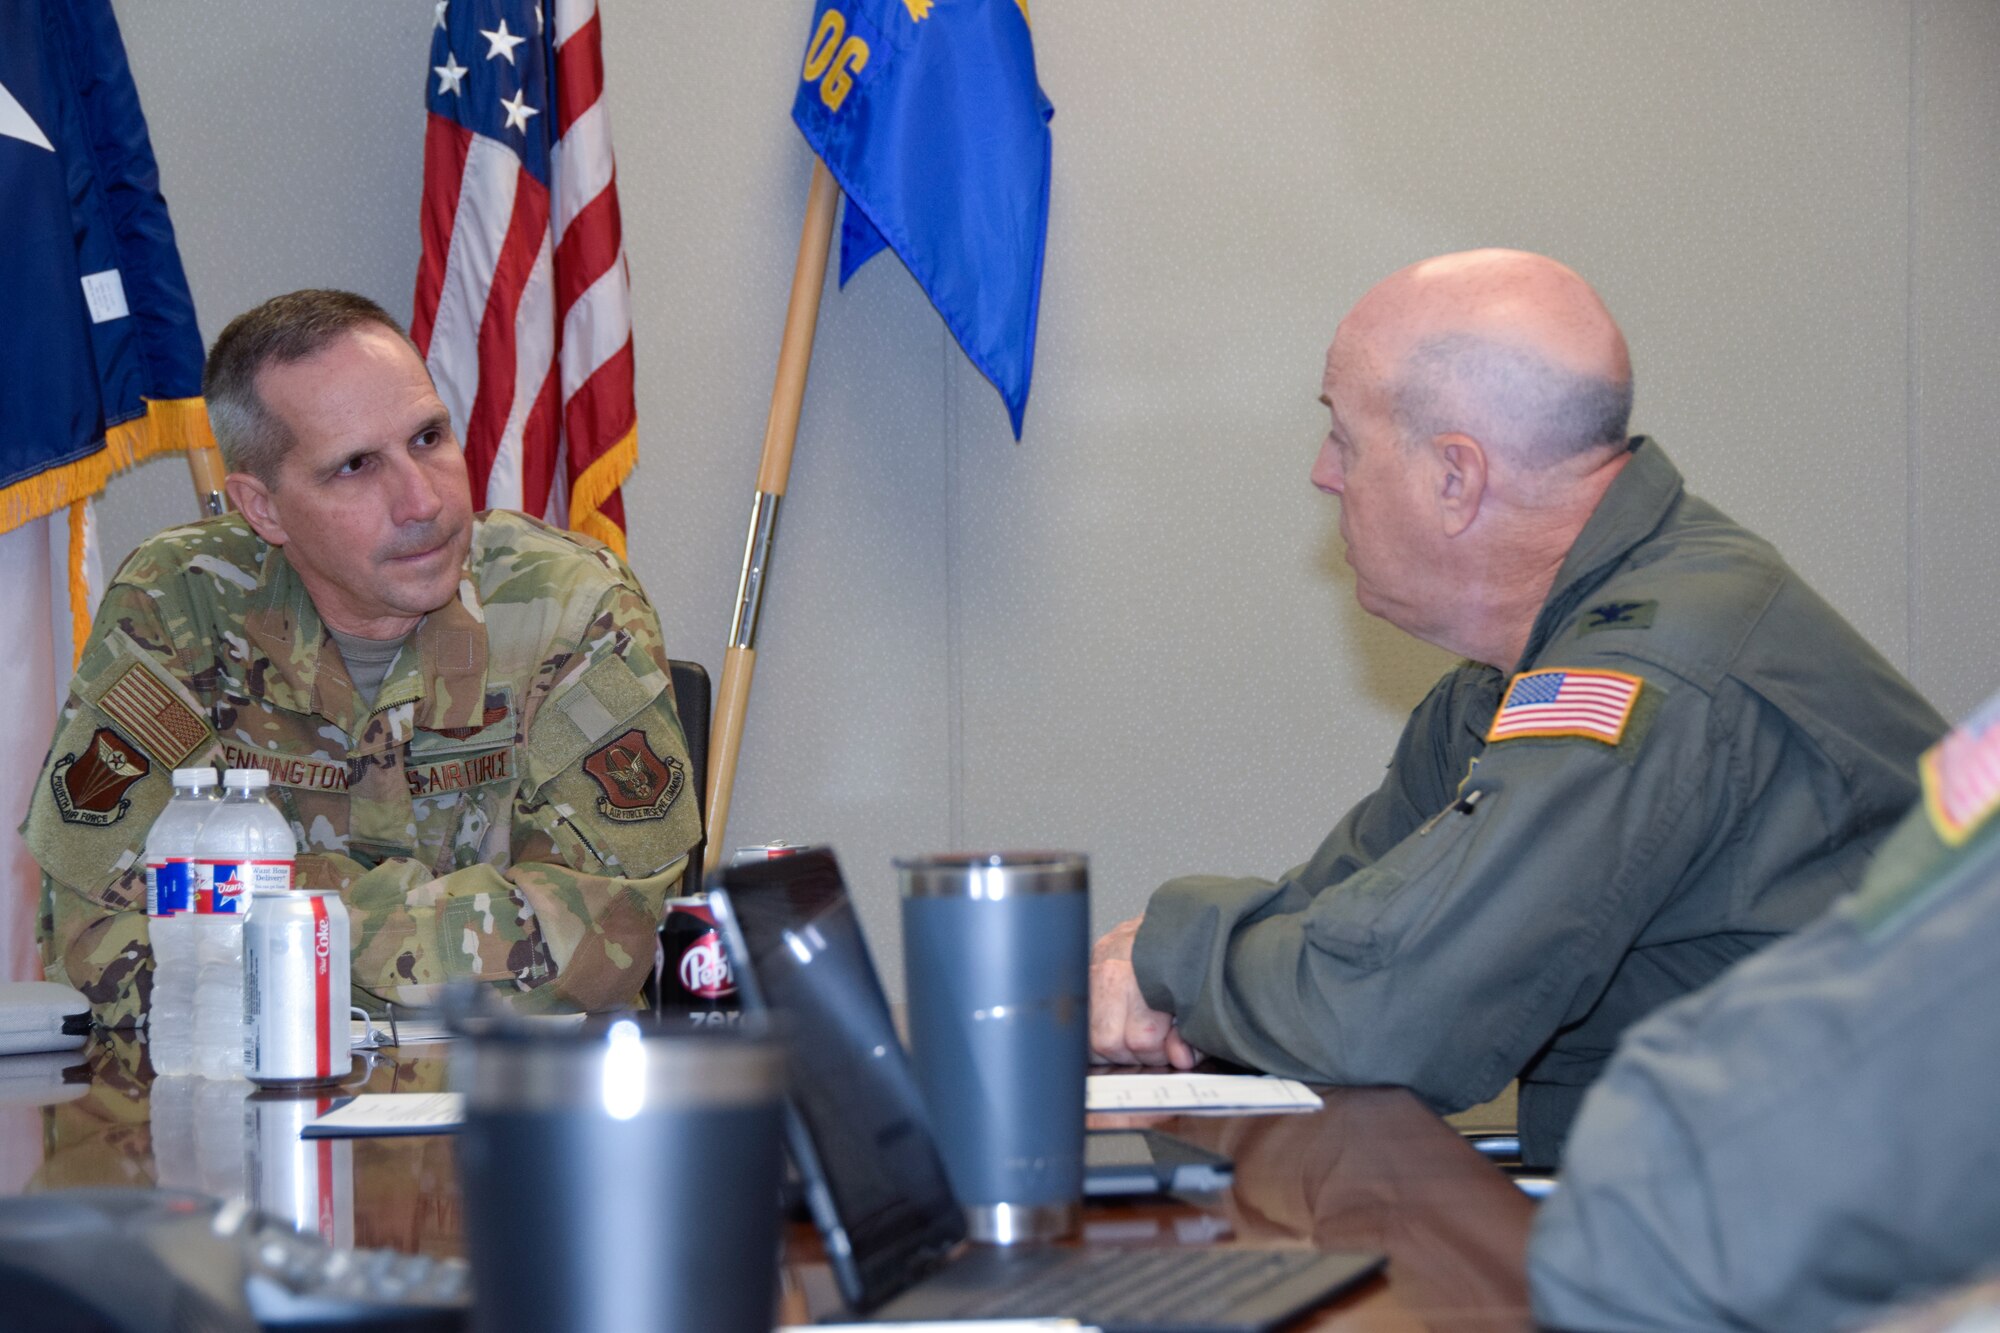 Maj. Gen. Jeffrey T. Pennington, 4th Air Force commander, converses with Col. James C. “JC” Miller, 433rd Operations Group commander, at Joint Base San Antonio-Lackland, Texas, July 7, 2021. Pennington toured the 433rd Airlift Wing and discussed improvements to the C-5M Super Galaxy Formal Training Unit. (U.S. Air Force photo by Senior Airman Brittany Wich)